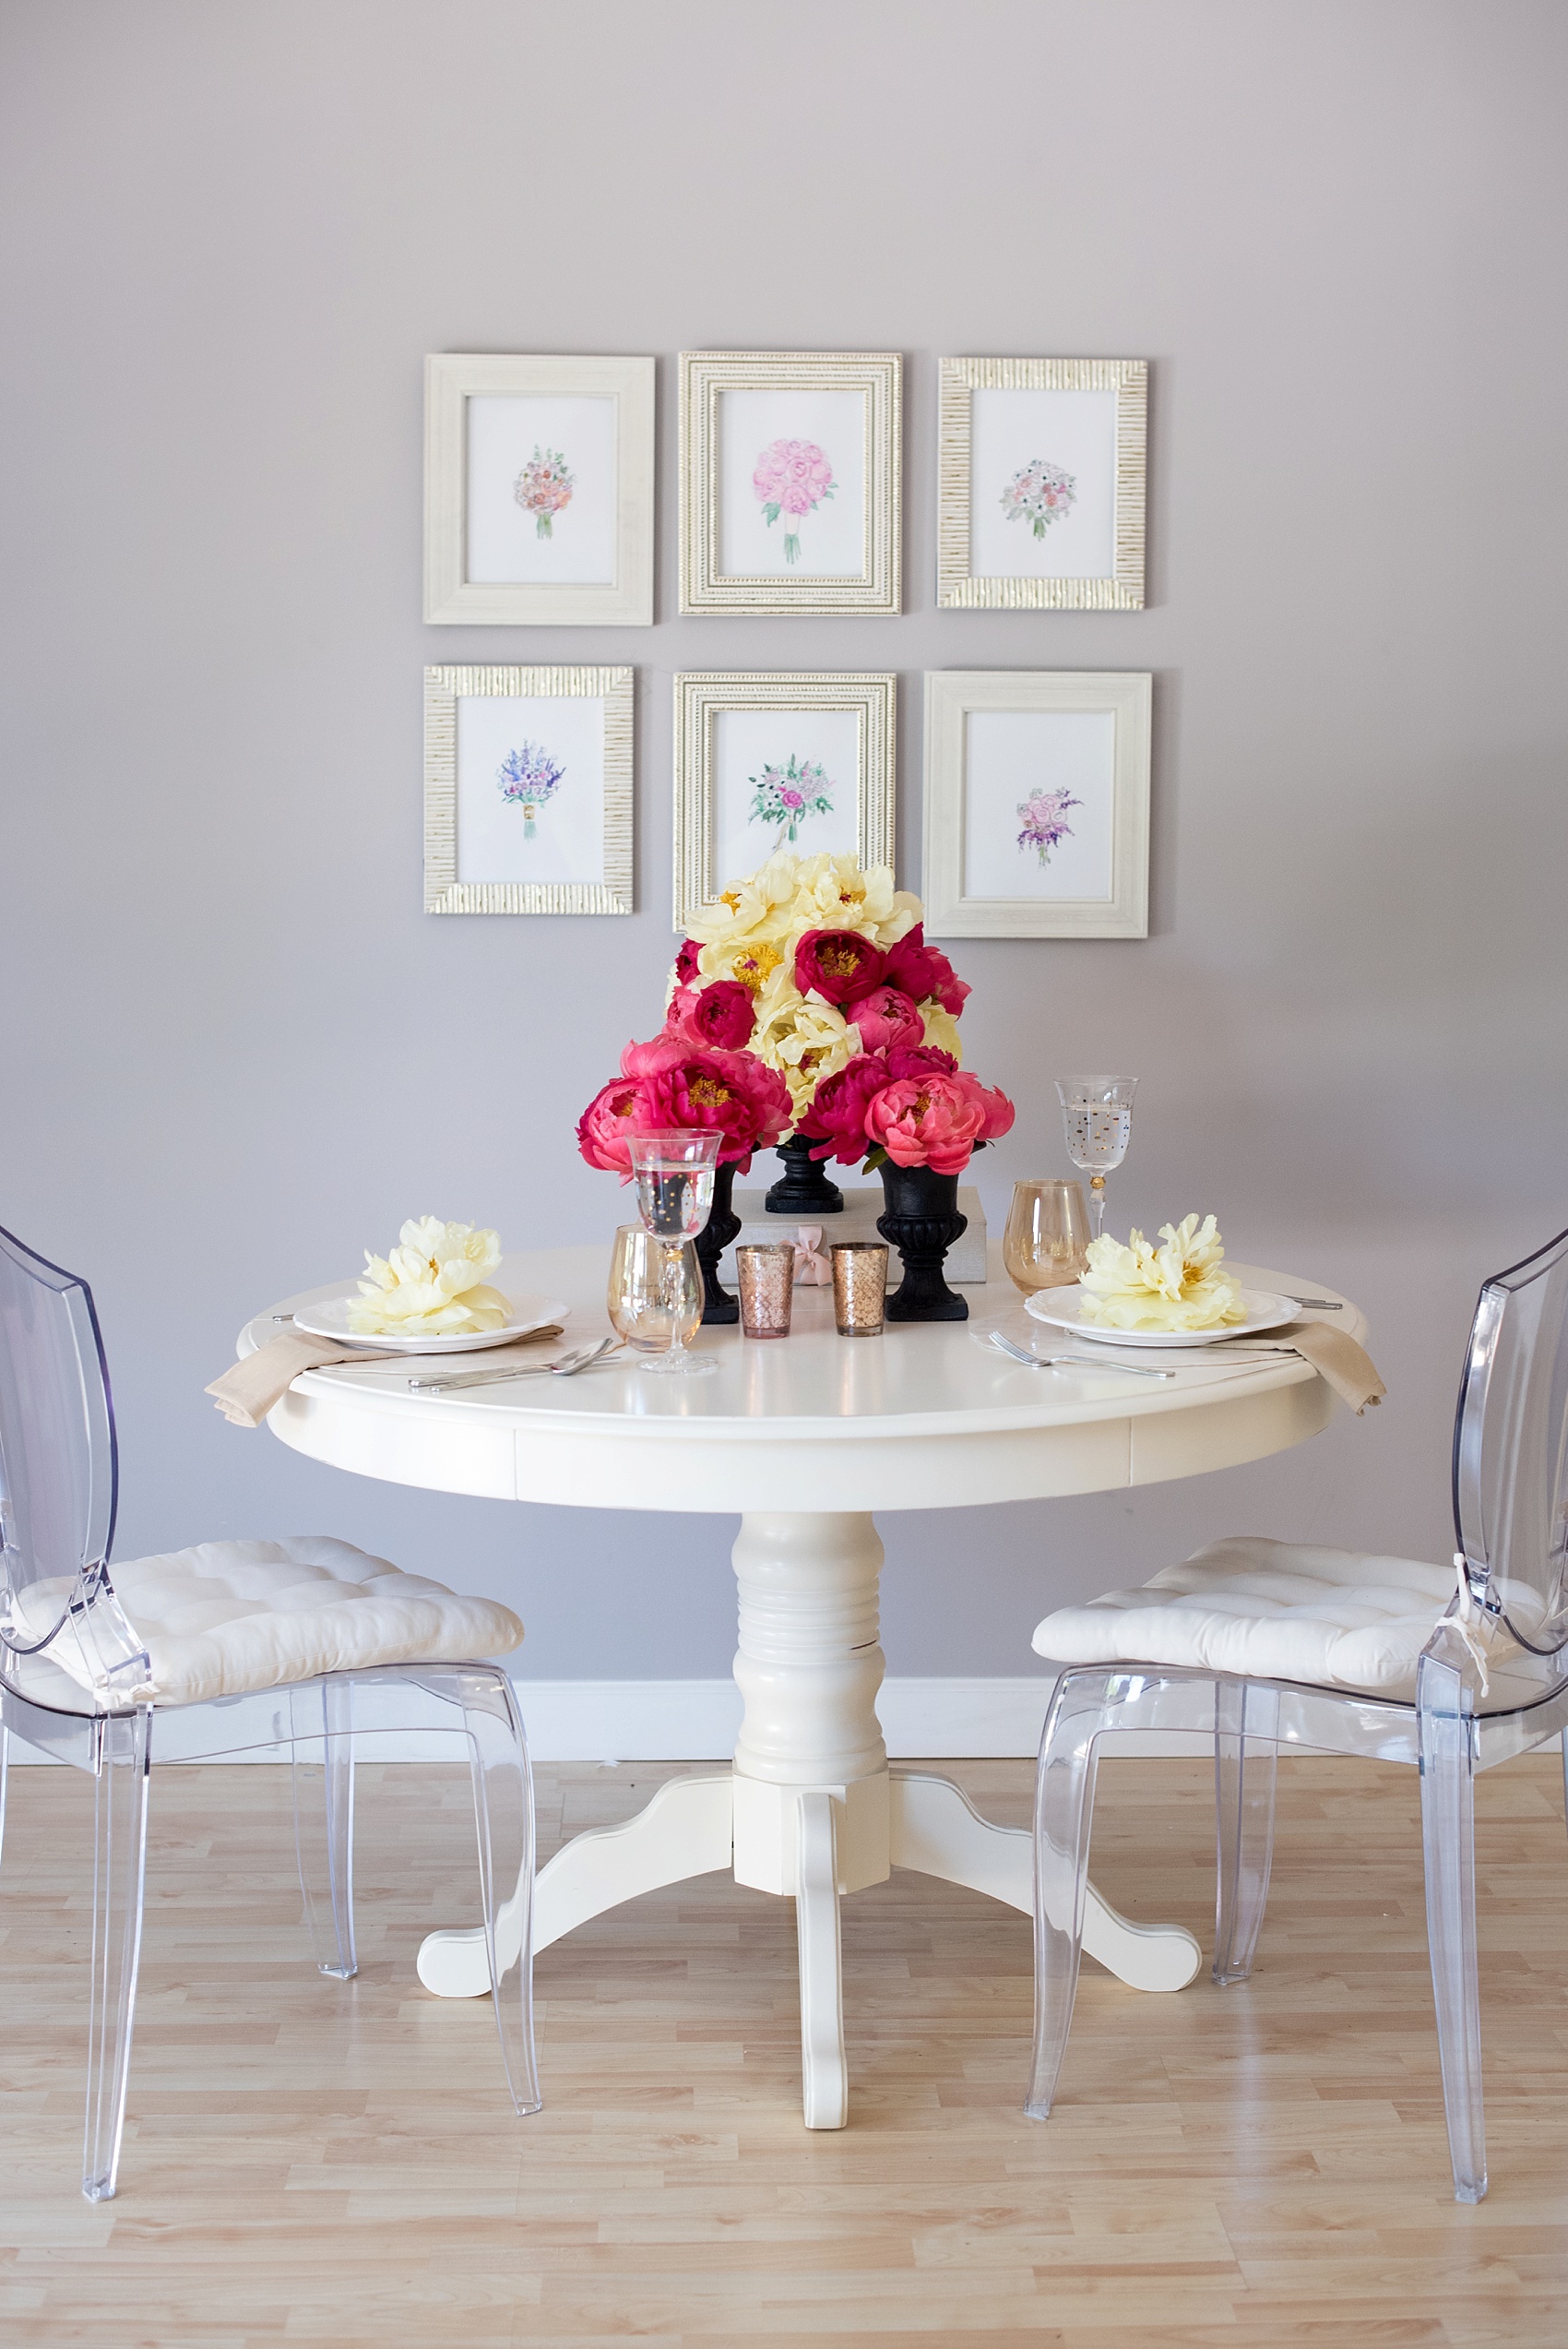 Peonies table setup photographed by Raleigh Wedding Photographer, Mikkel Paige.